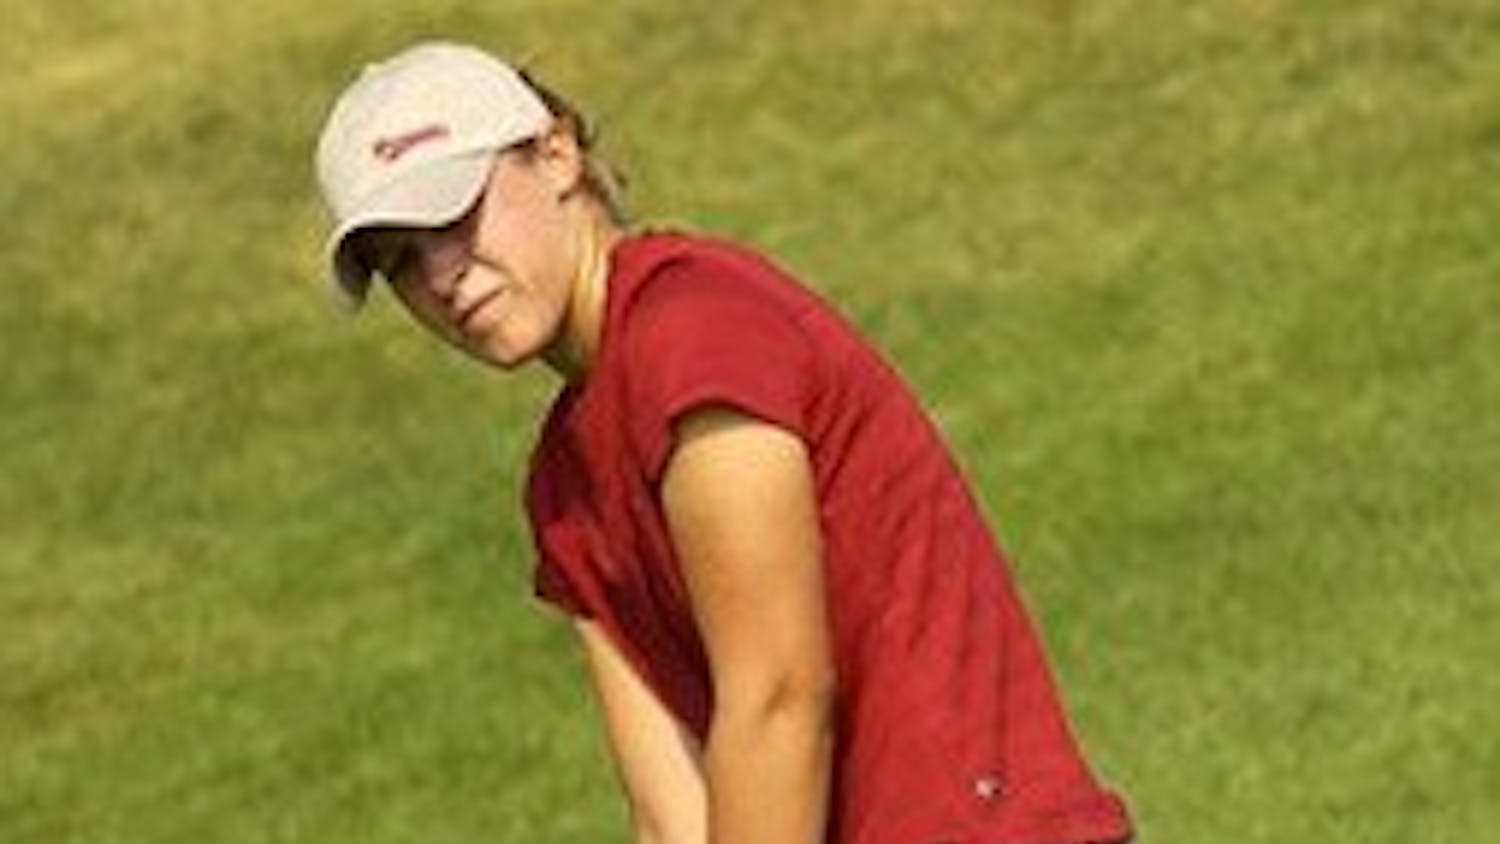 UW women's golf wraps up fall schedule in eighth place